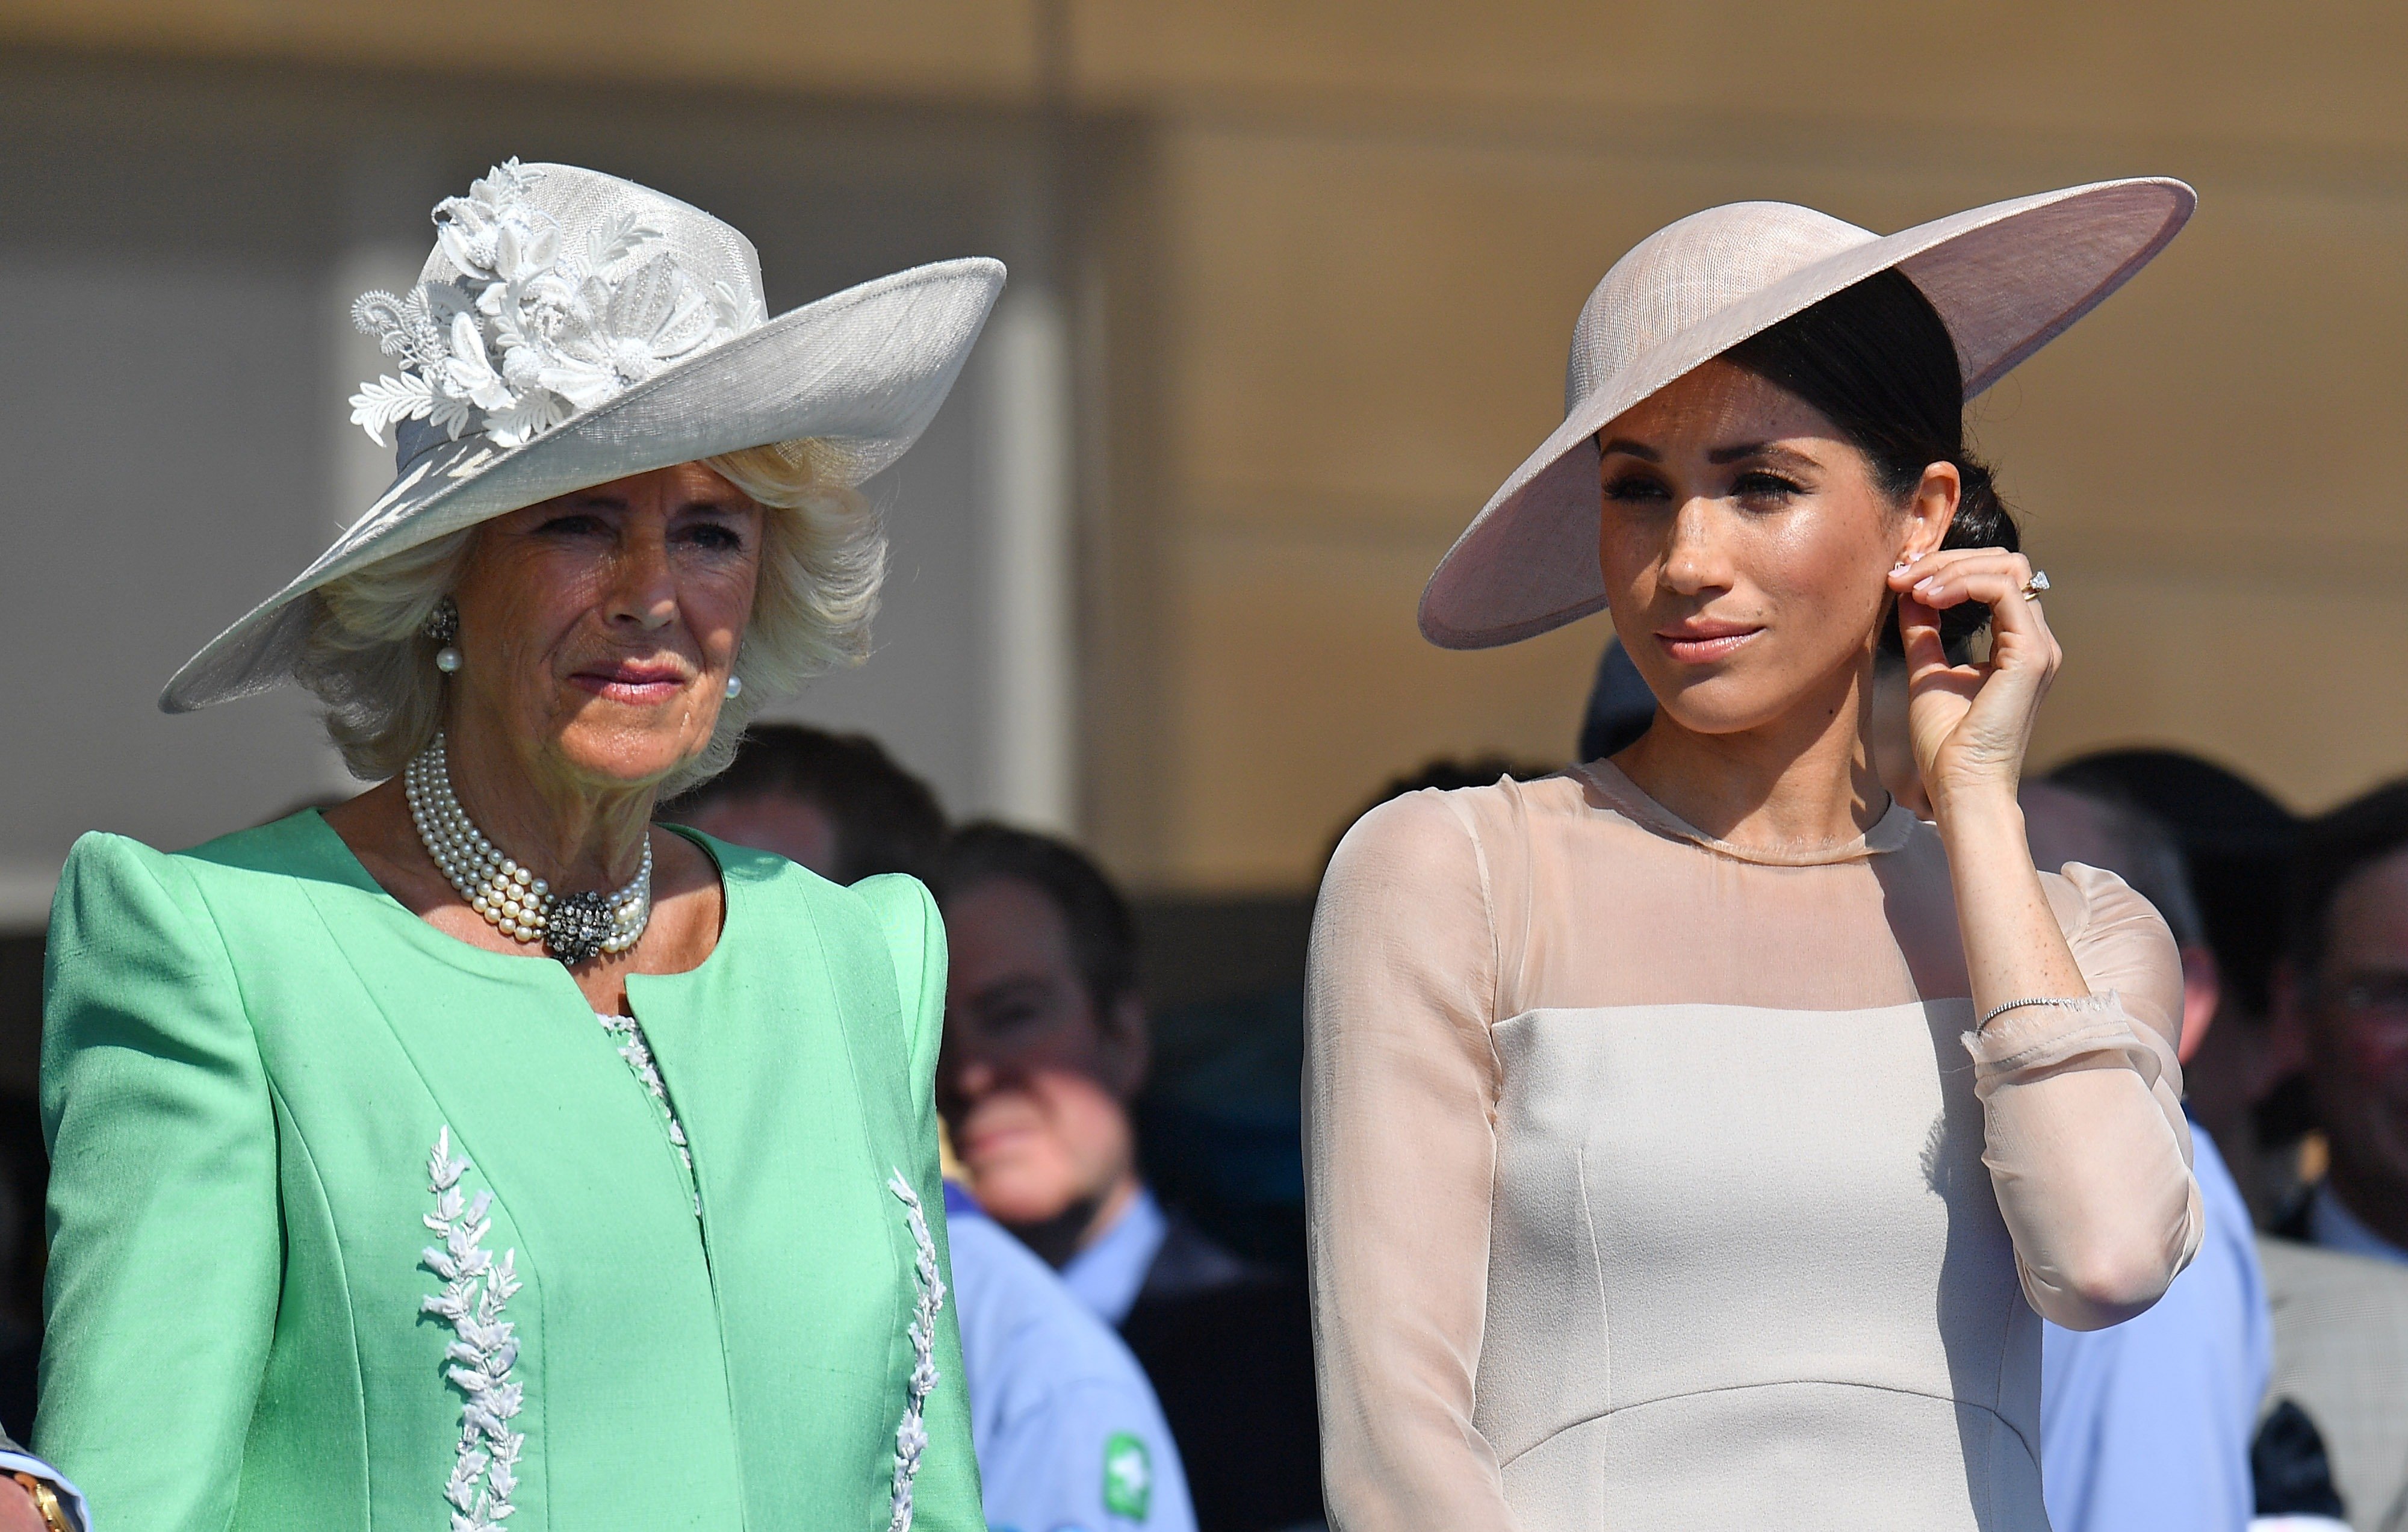 Camilla, Duchess of Cornwall and Meghan, Duchess of Sussex attend The Prince of Wales' 70th Birthday Patronage Celebration held at Buckingham Palace on May 22, 2018 in London, England | Source: Getty Images